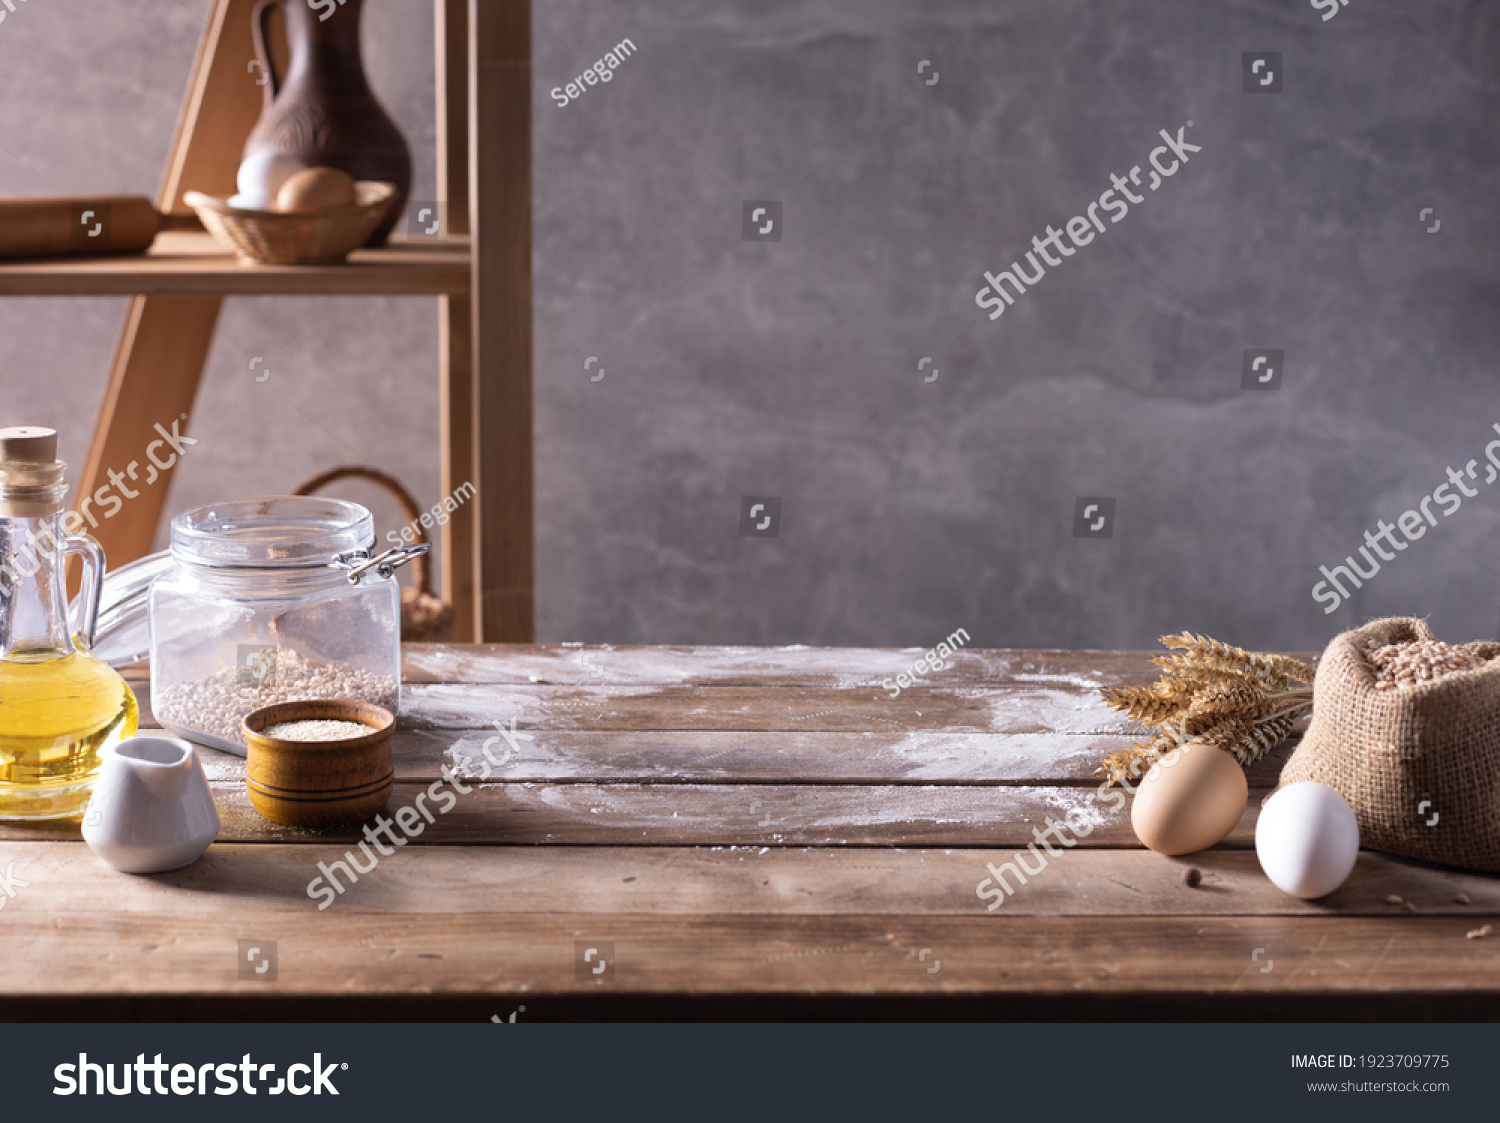 Bakery ingredients for homemade bread cooking or baking on table. Food set at wooden tabletop near wall background texture with copy space. Front view of bakery concept #1923709775